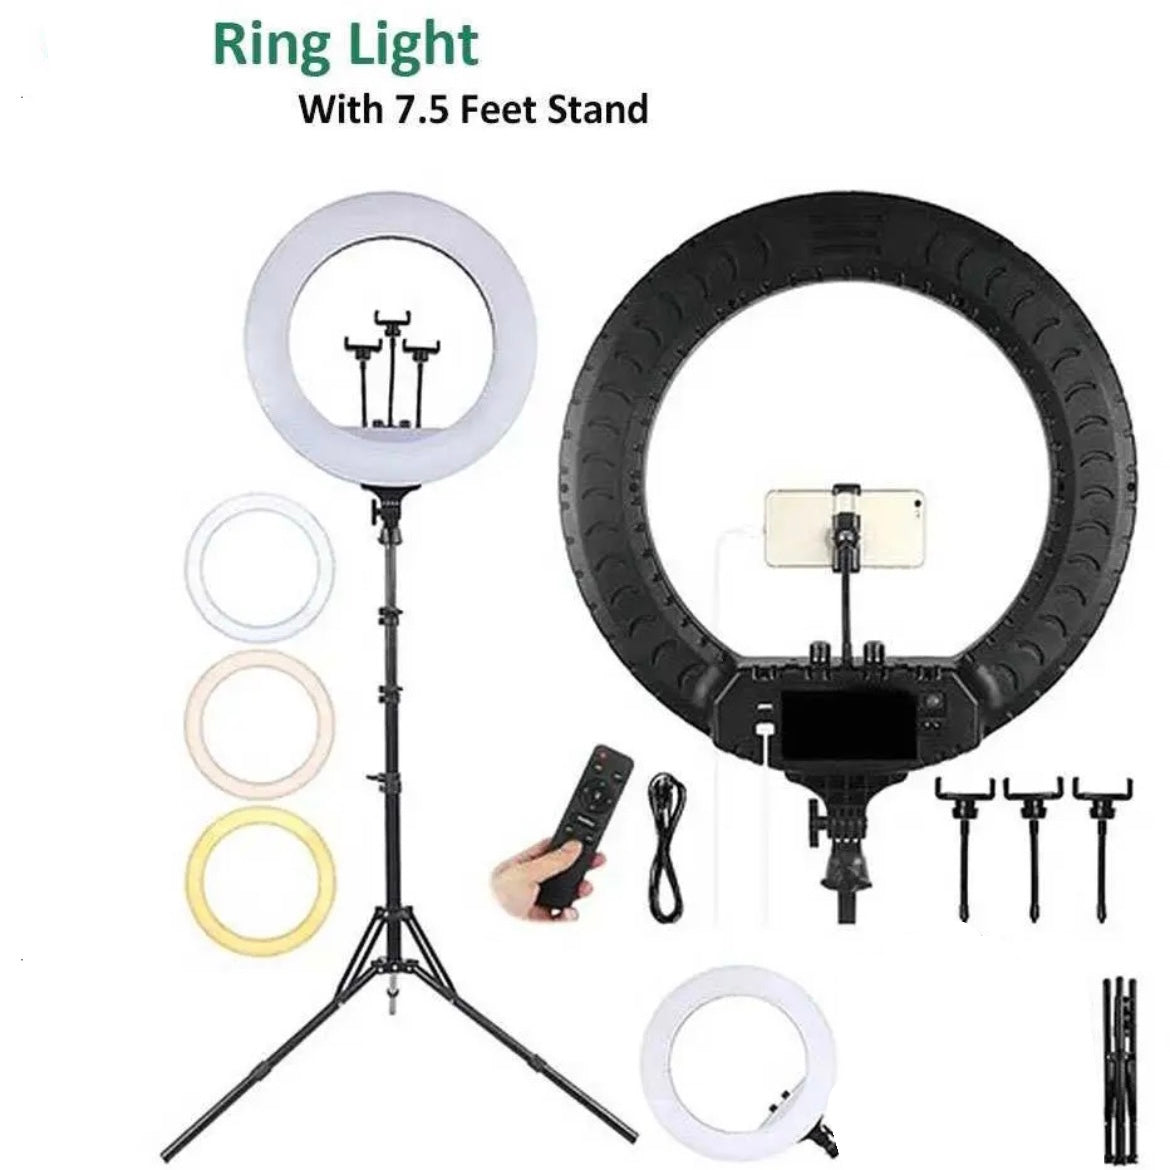 Ring Light With All Sizes 26cm 30cm 33cm 36cm 46cm With Tripod